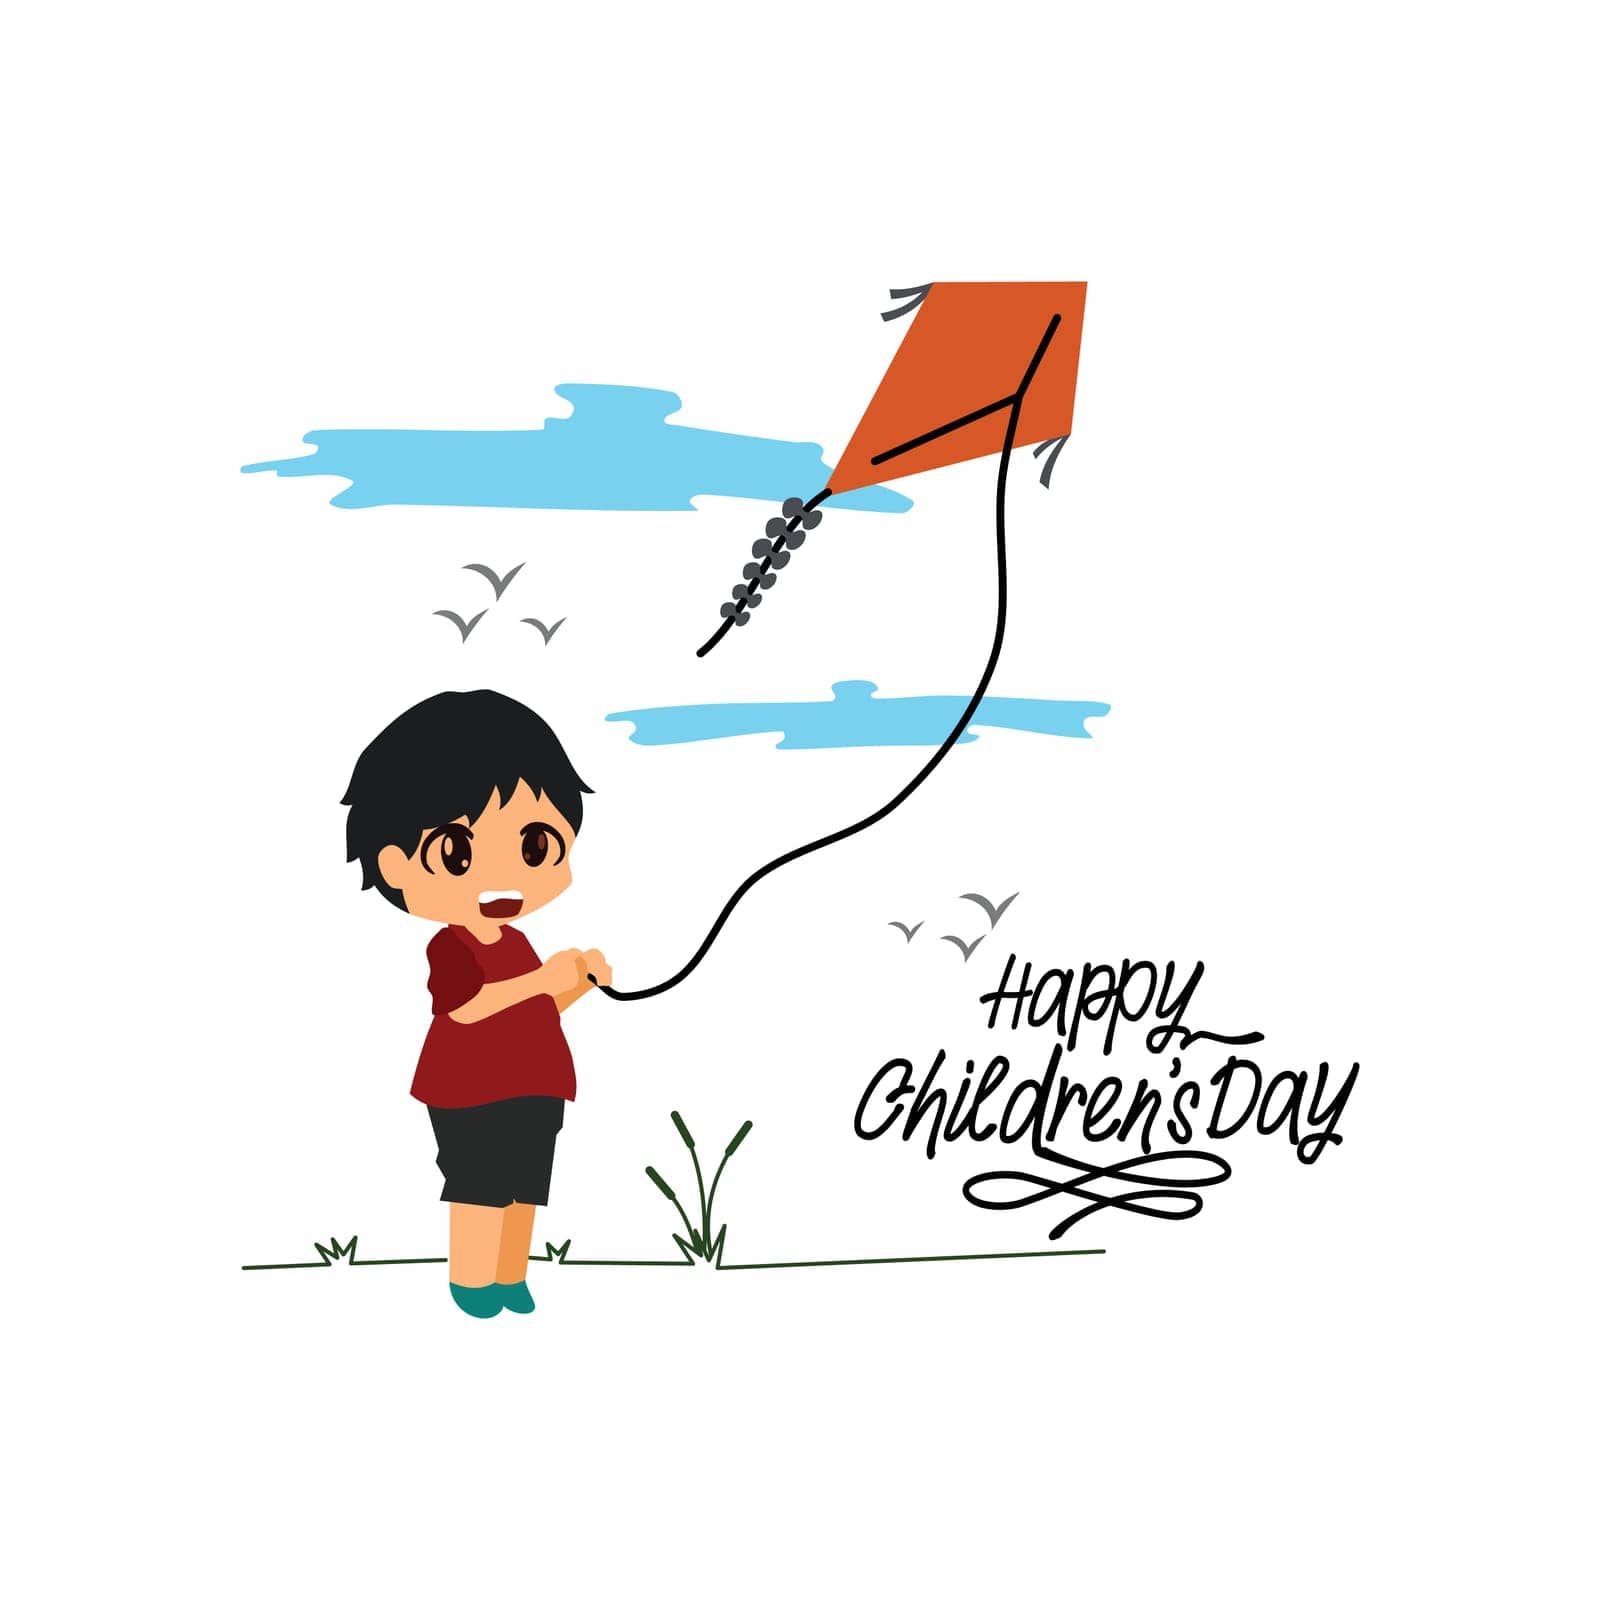 Kid playing with kites Illustration. Happy Children's Day by alluranet